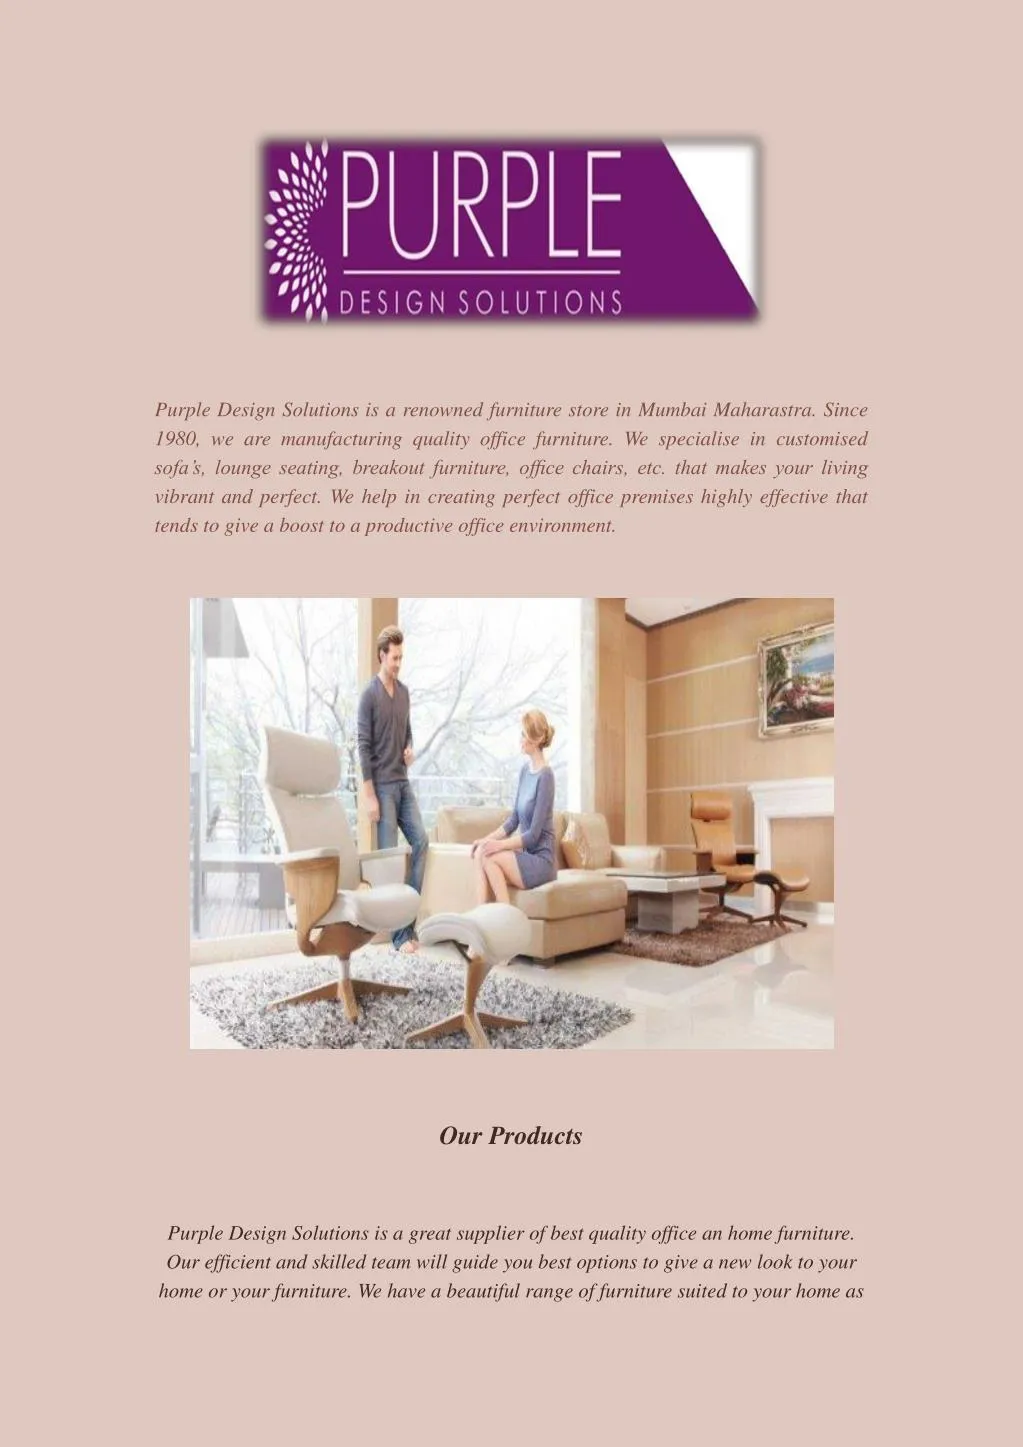 purple design solutions is a renowned furniture